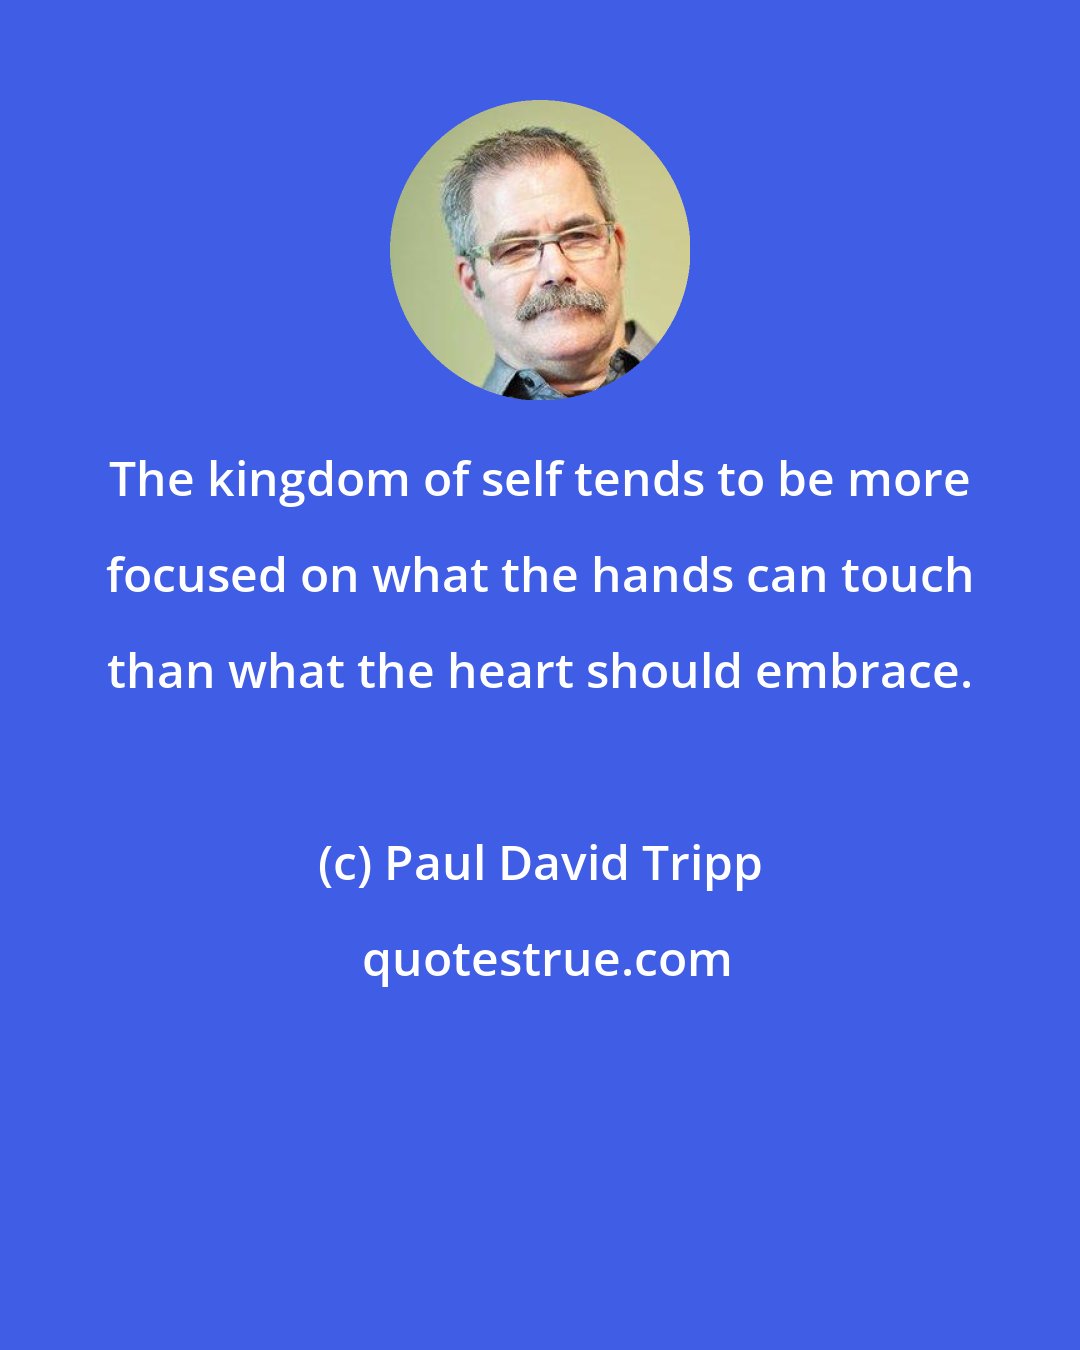 Paul David Tripp: The kingdom of self tends to be more focused on what the hands can touch than what the heart should embrace.